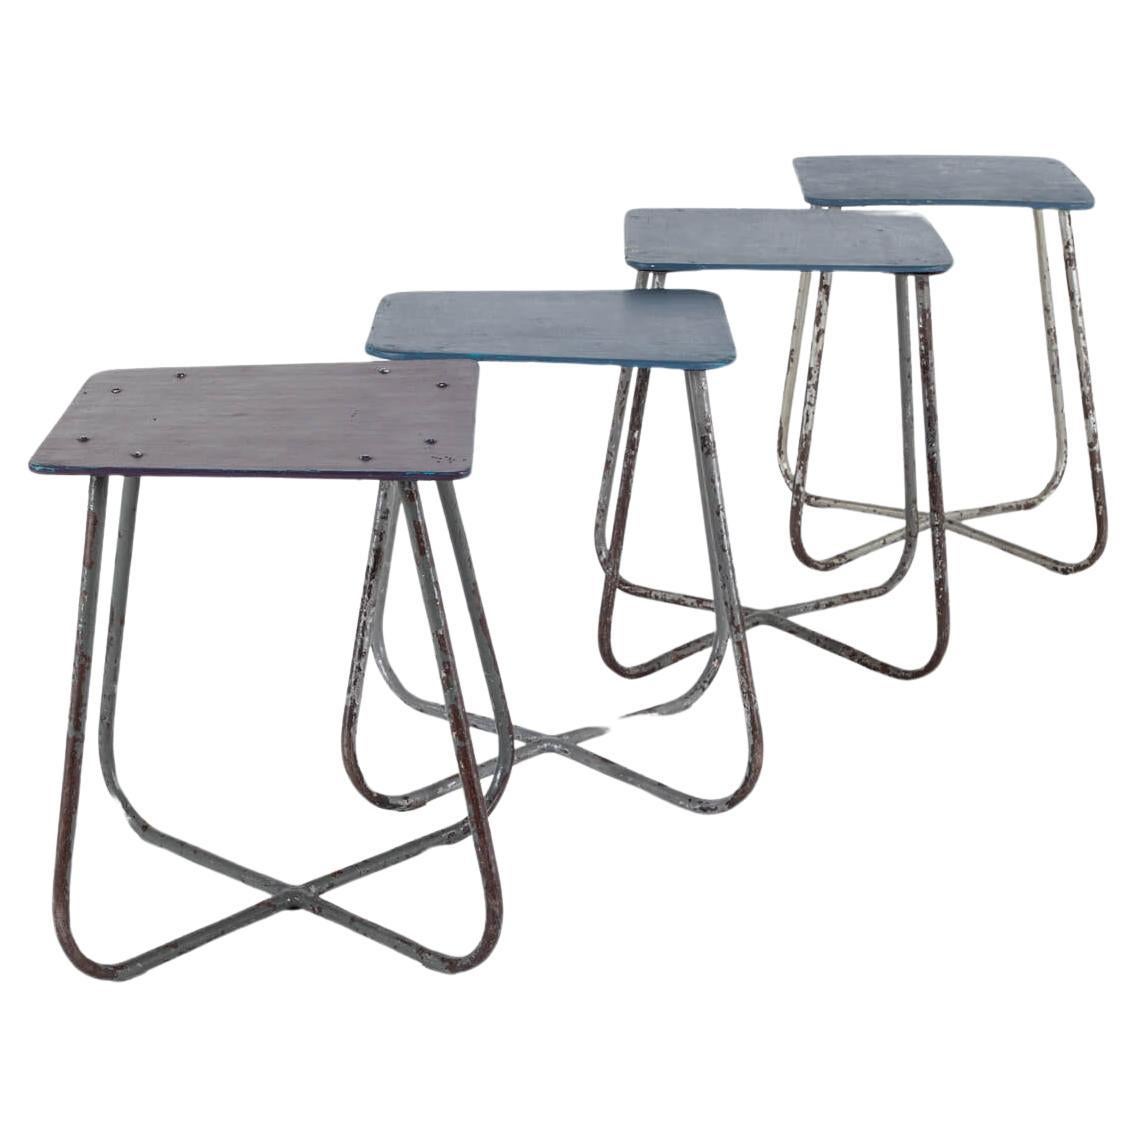 Four Industrial Stools For Sale